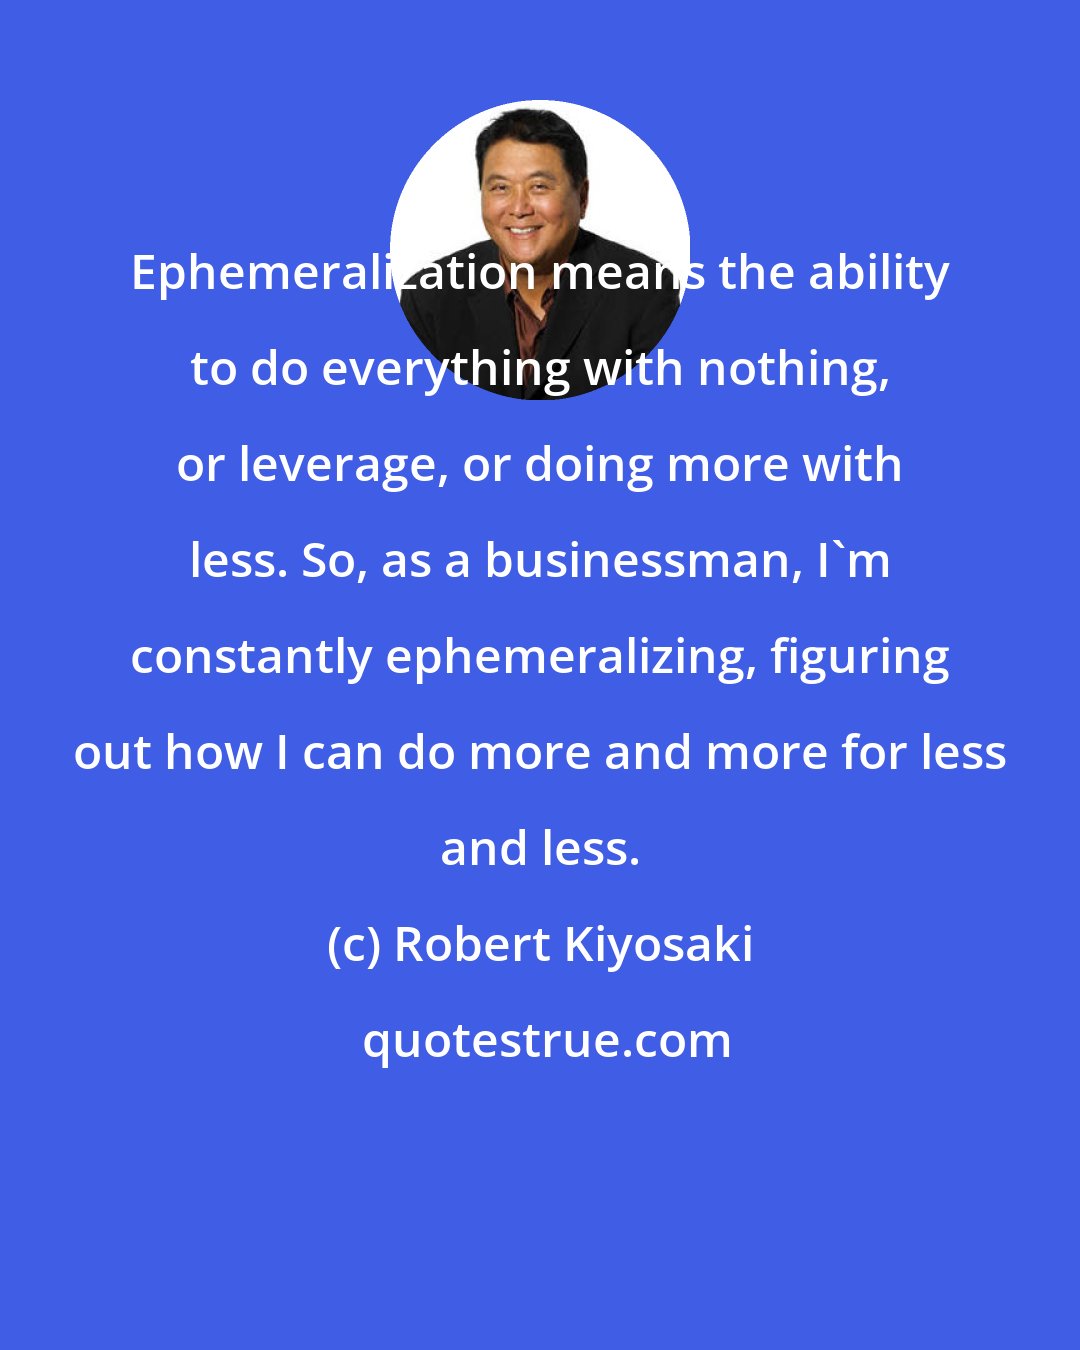 Robert Kiyosaki: Ephemeralization means the ability to do everything with nothing, or leverage, or doing more with less. So, as a businessman, I'm constantly ephemeralizing, figuring out how I can do more and more for less and less.